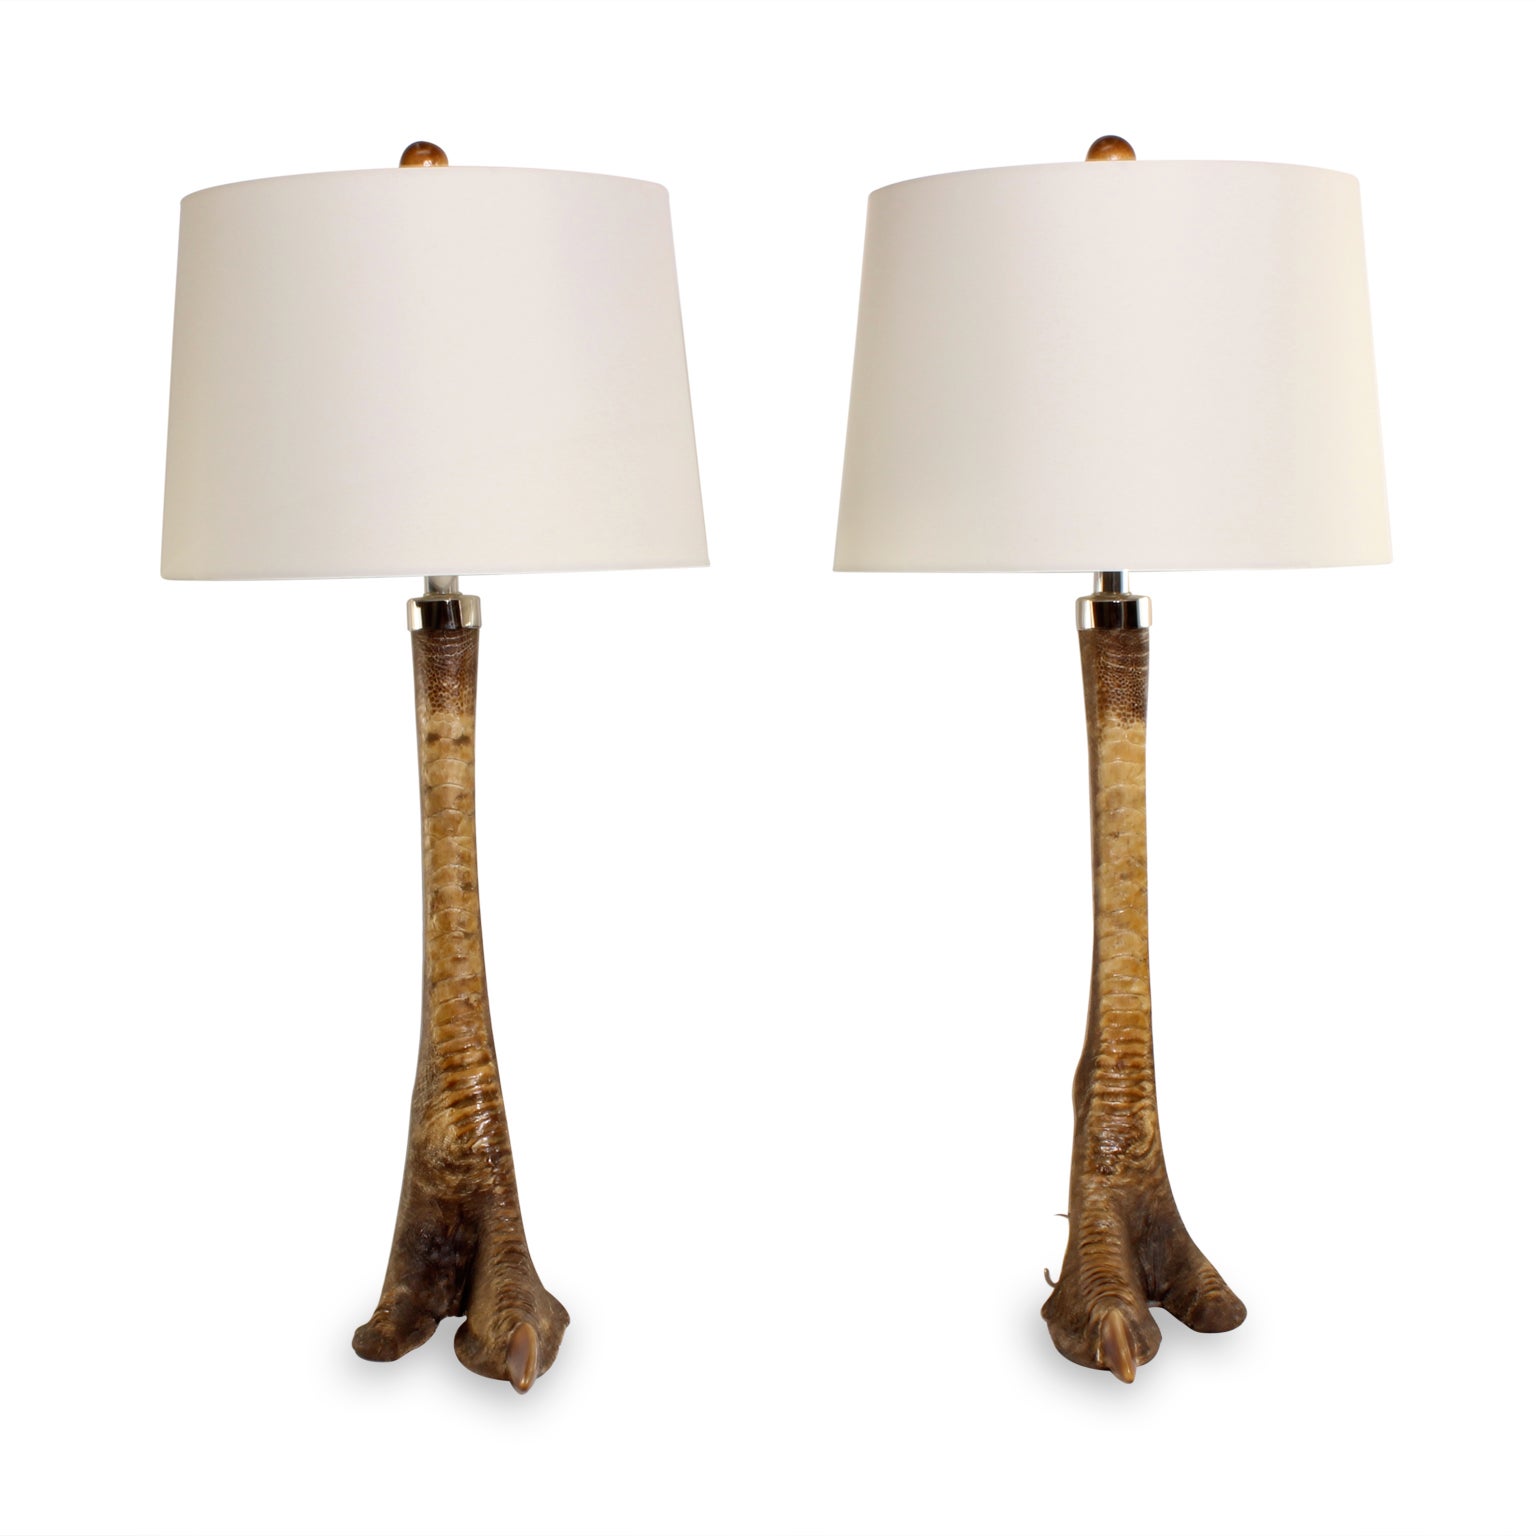 Pair of Ostrich Leg Lamps with Silvered Accents